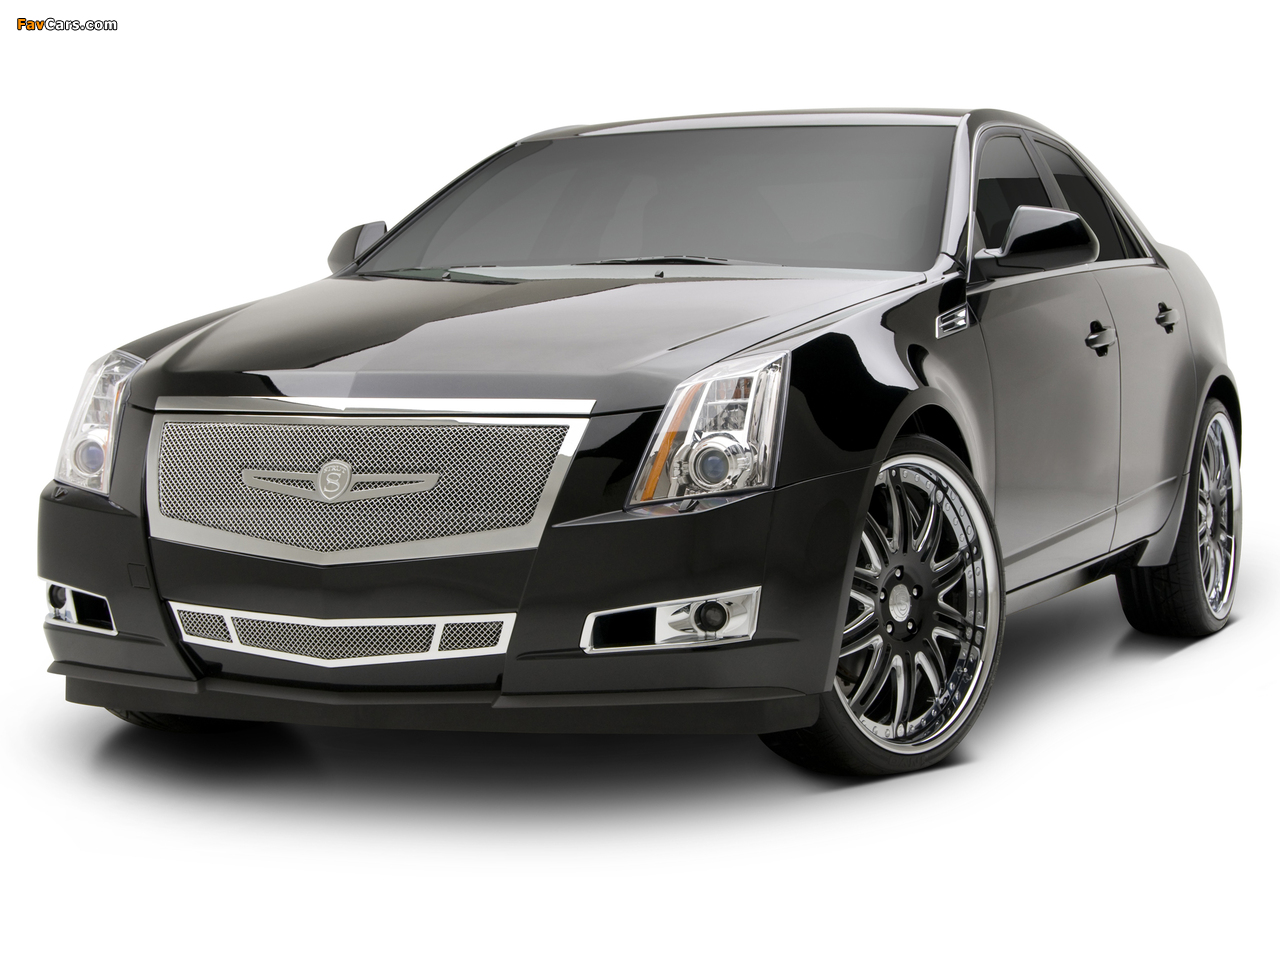 Images of STRUT Cadillac CTS Grille Collection 2009 (1280 x 960)